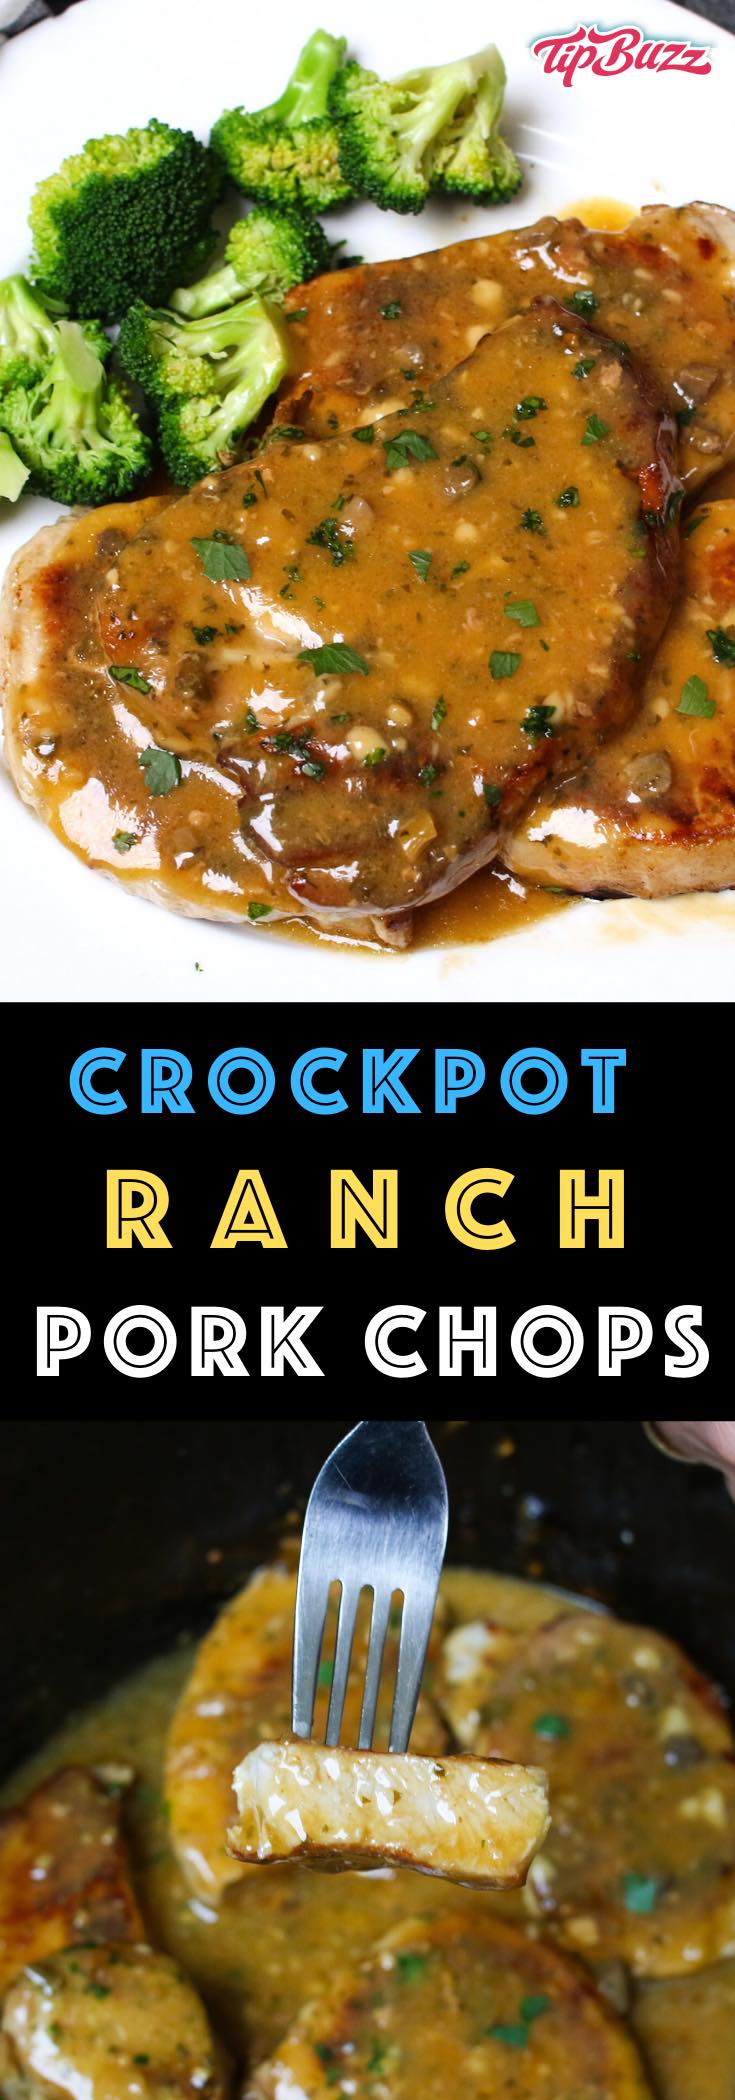 Crockpot Ranch Pork Chops are creamy and delicious. Plus, they're easy to make in the slow cooker with just 3 ingredients: pork chops, cream of mushroom soup and ranch mix. Only 5 minutes of prep and 3 ingredients for a mouthwatering dinner that's family friendly and affordable.